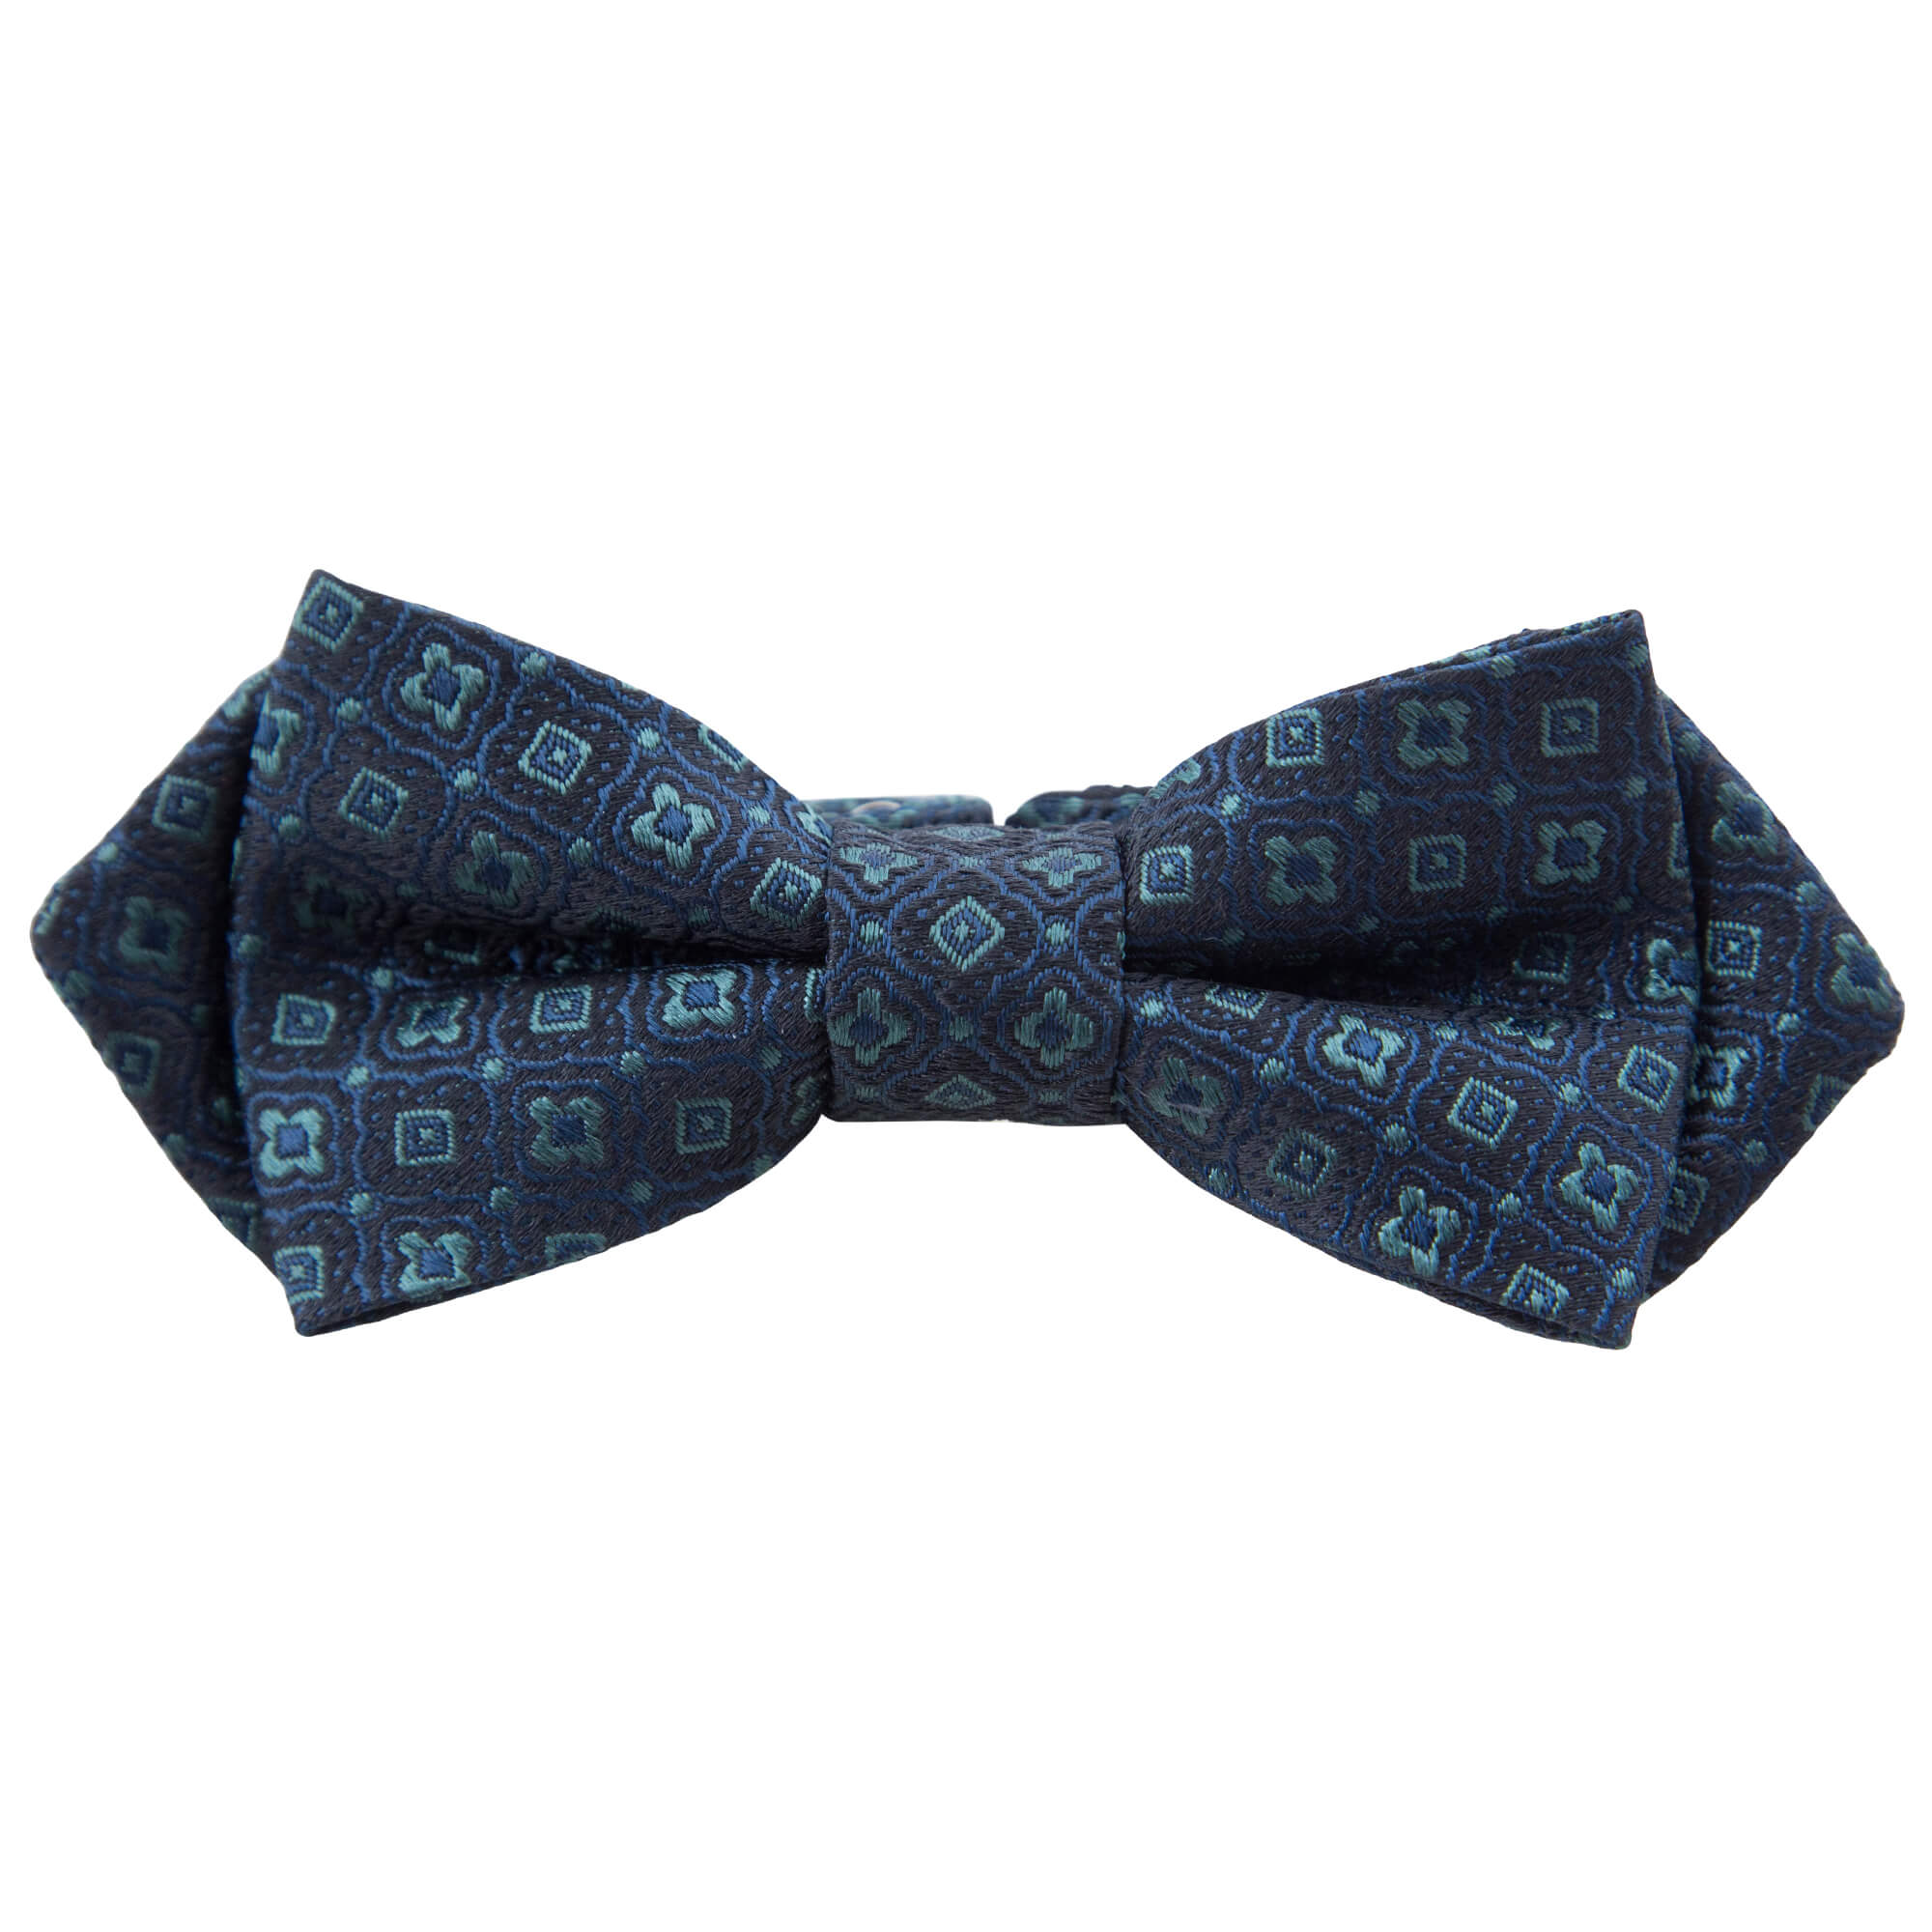 NAVY WITH TEAL GEOMETRIC DESIGN BOW TIE